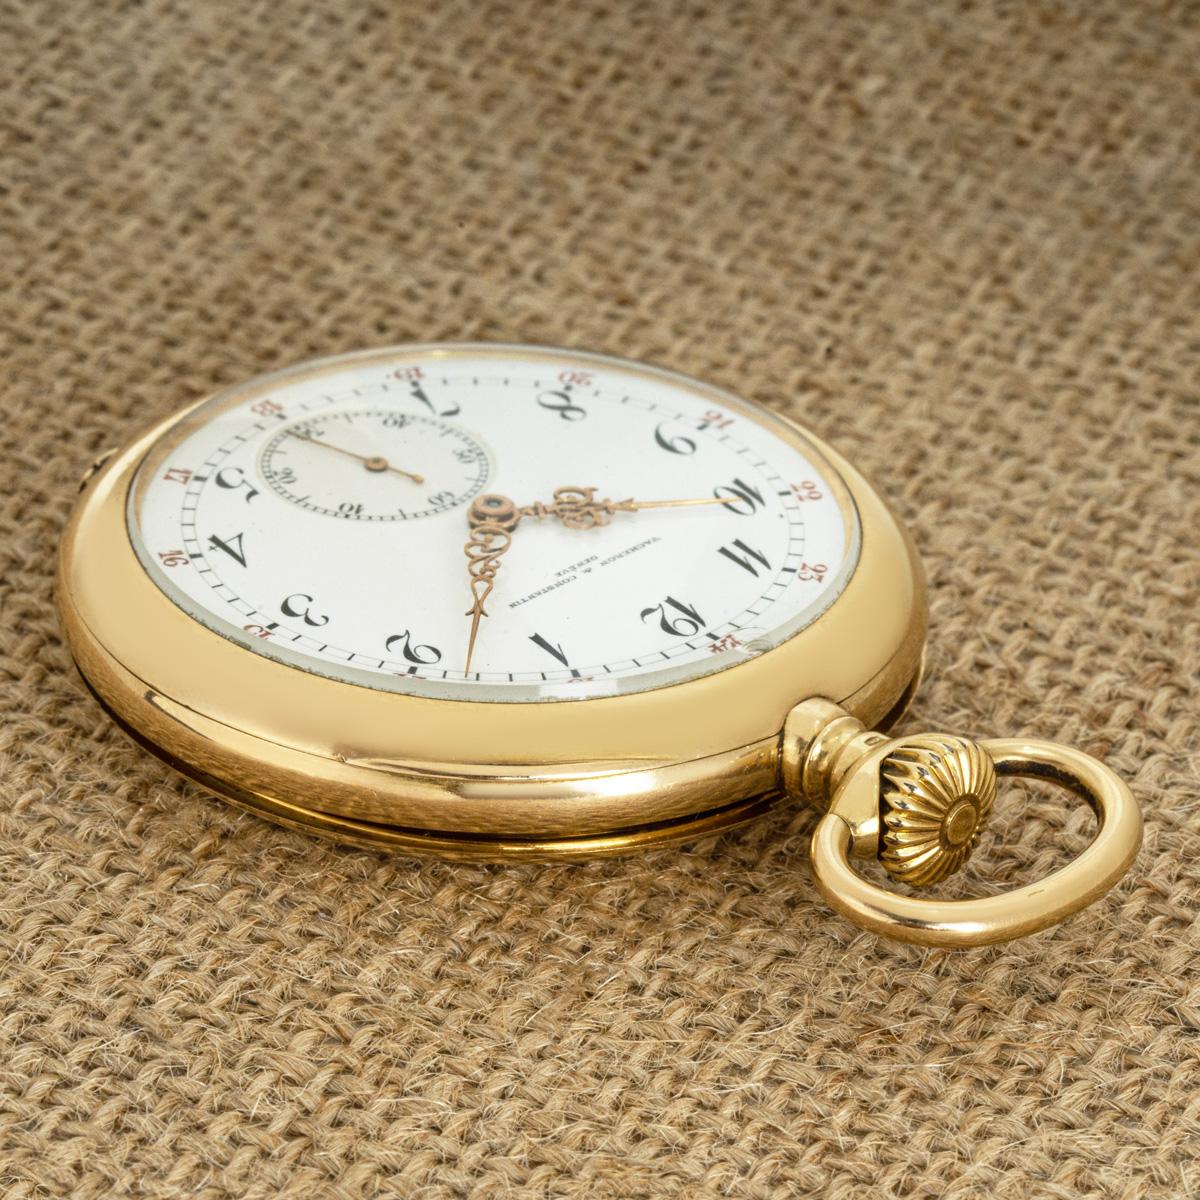 Vacheron Constantin. A Rare 18ct Yellow Gold Keyless Lever Open Face Quarter Repeater Pocket watch C1900.

Dial: The white enamel dial signed Vacheron Constantin Geneve with Breguet numerals, with unusual outer minute track with red twenty four hour